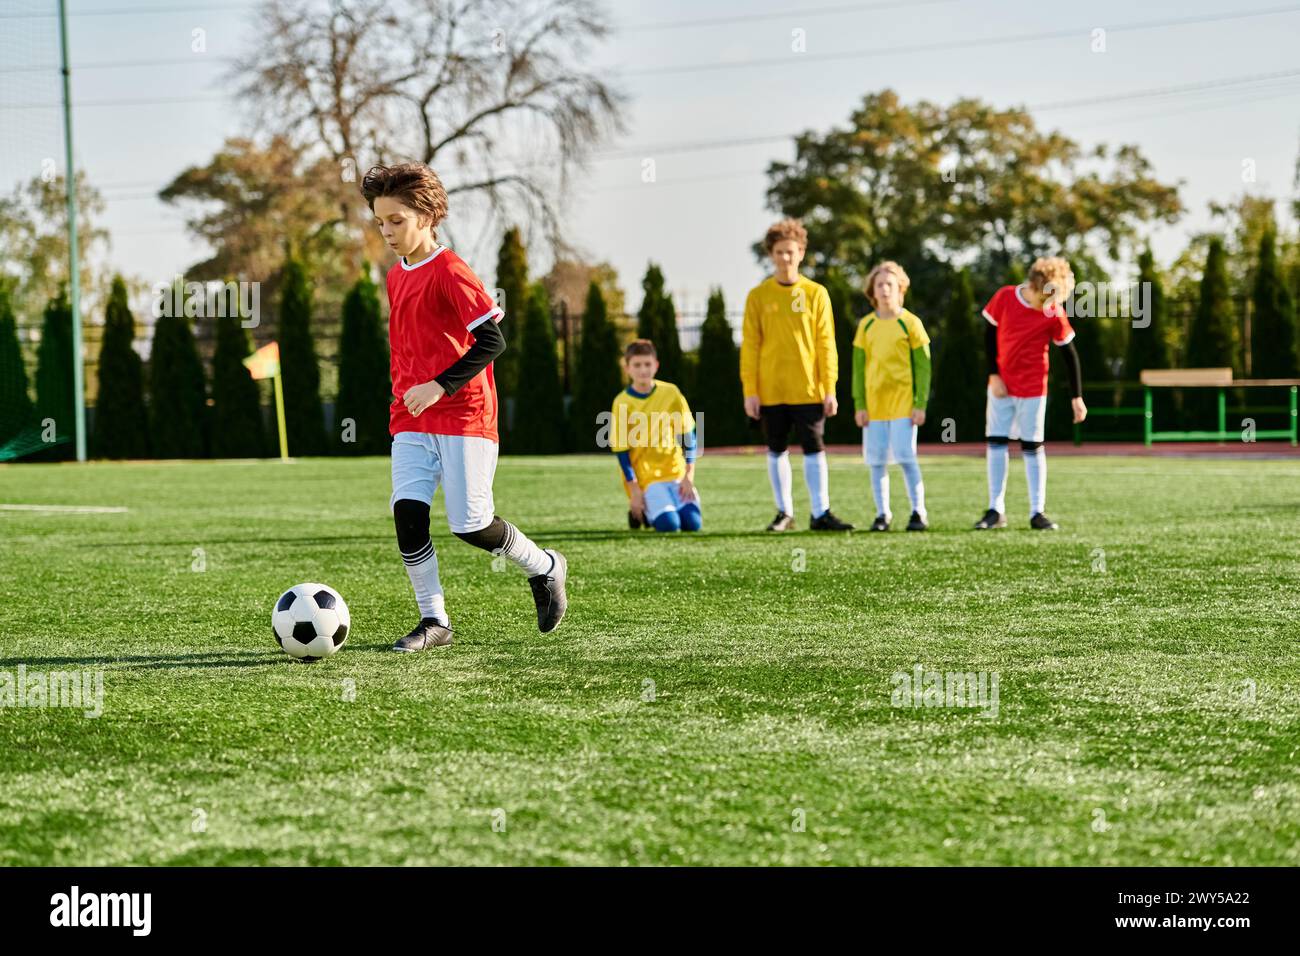 A group of young children, filled with joy and enthusiasm, are engaged in a spirited game of soccer. They are running, kicking, and passing the ball, Stock Photo